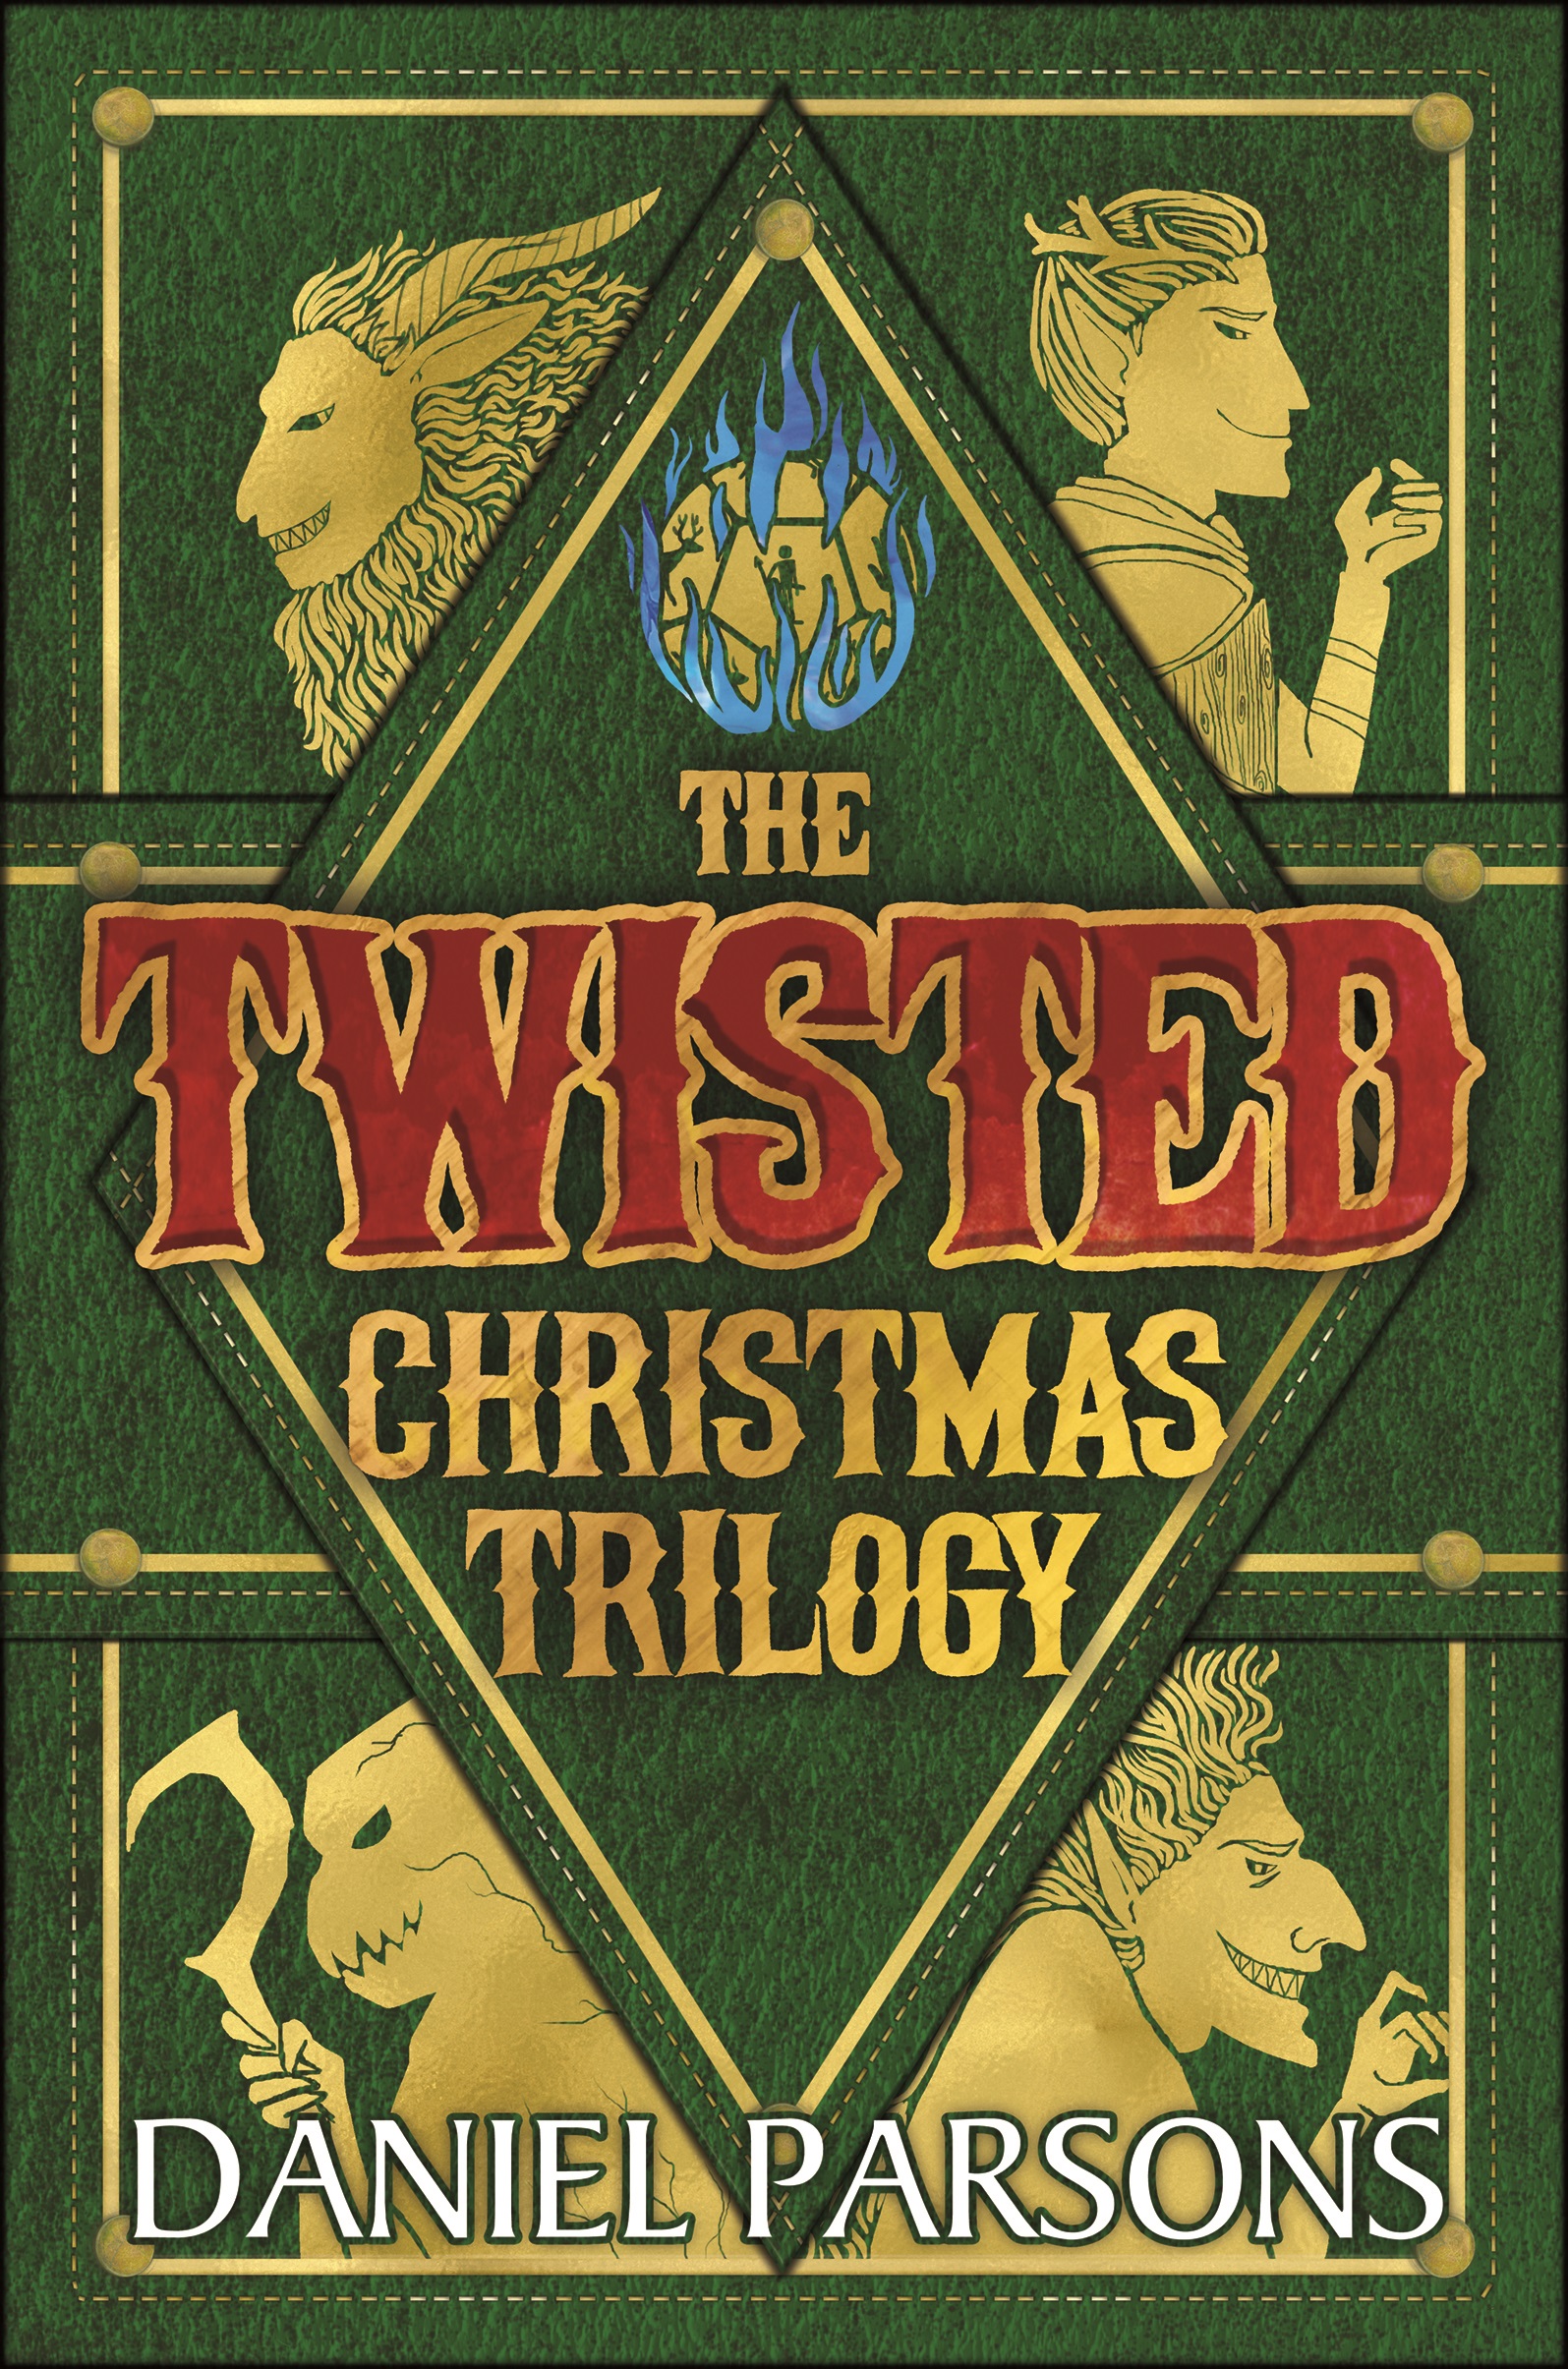 The Twisted Christmas Trilogy